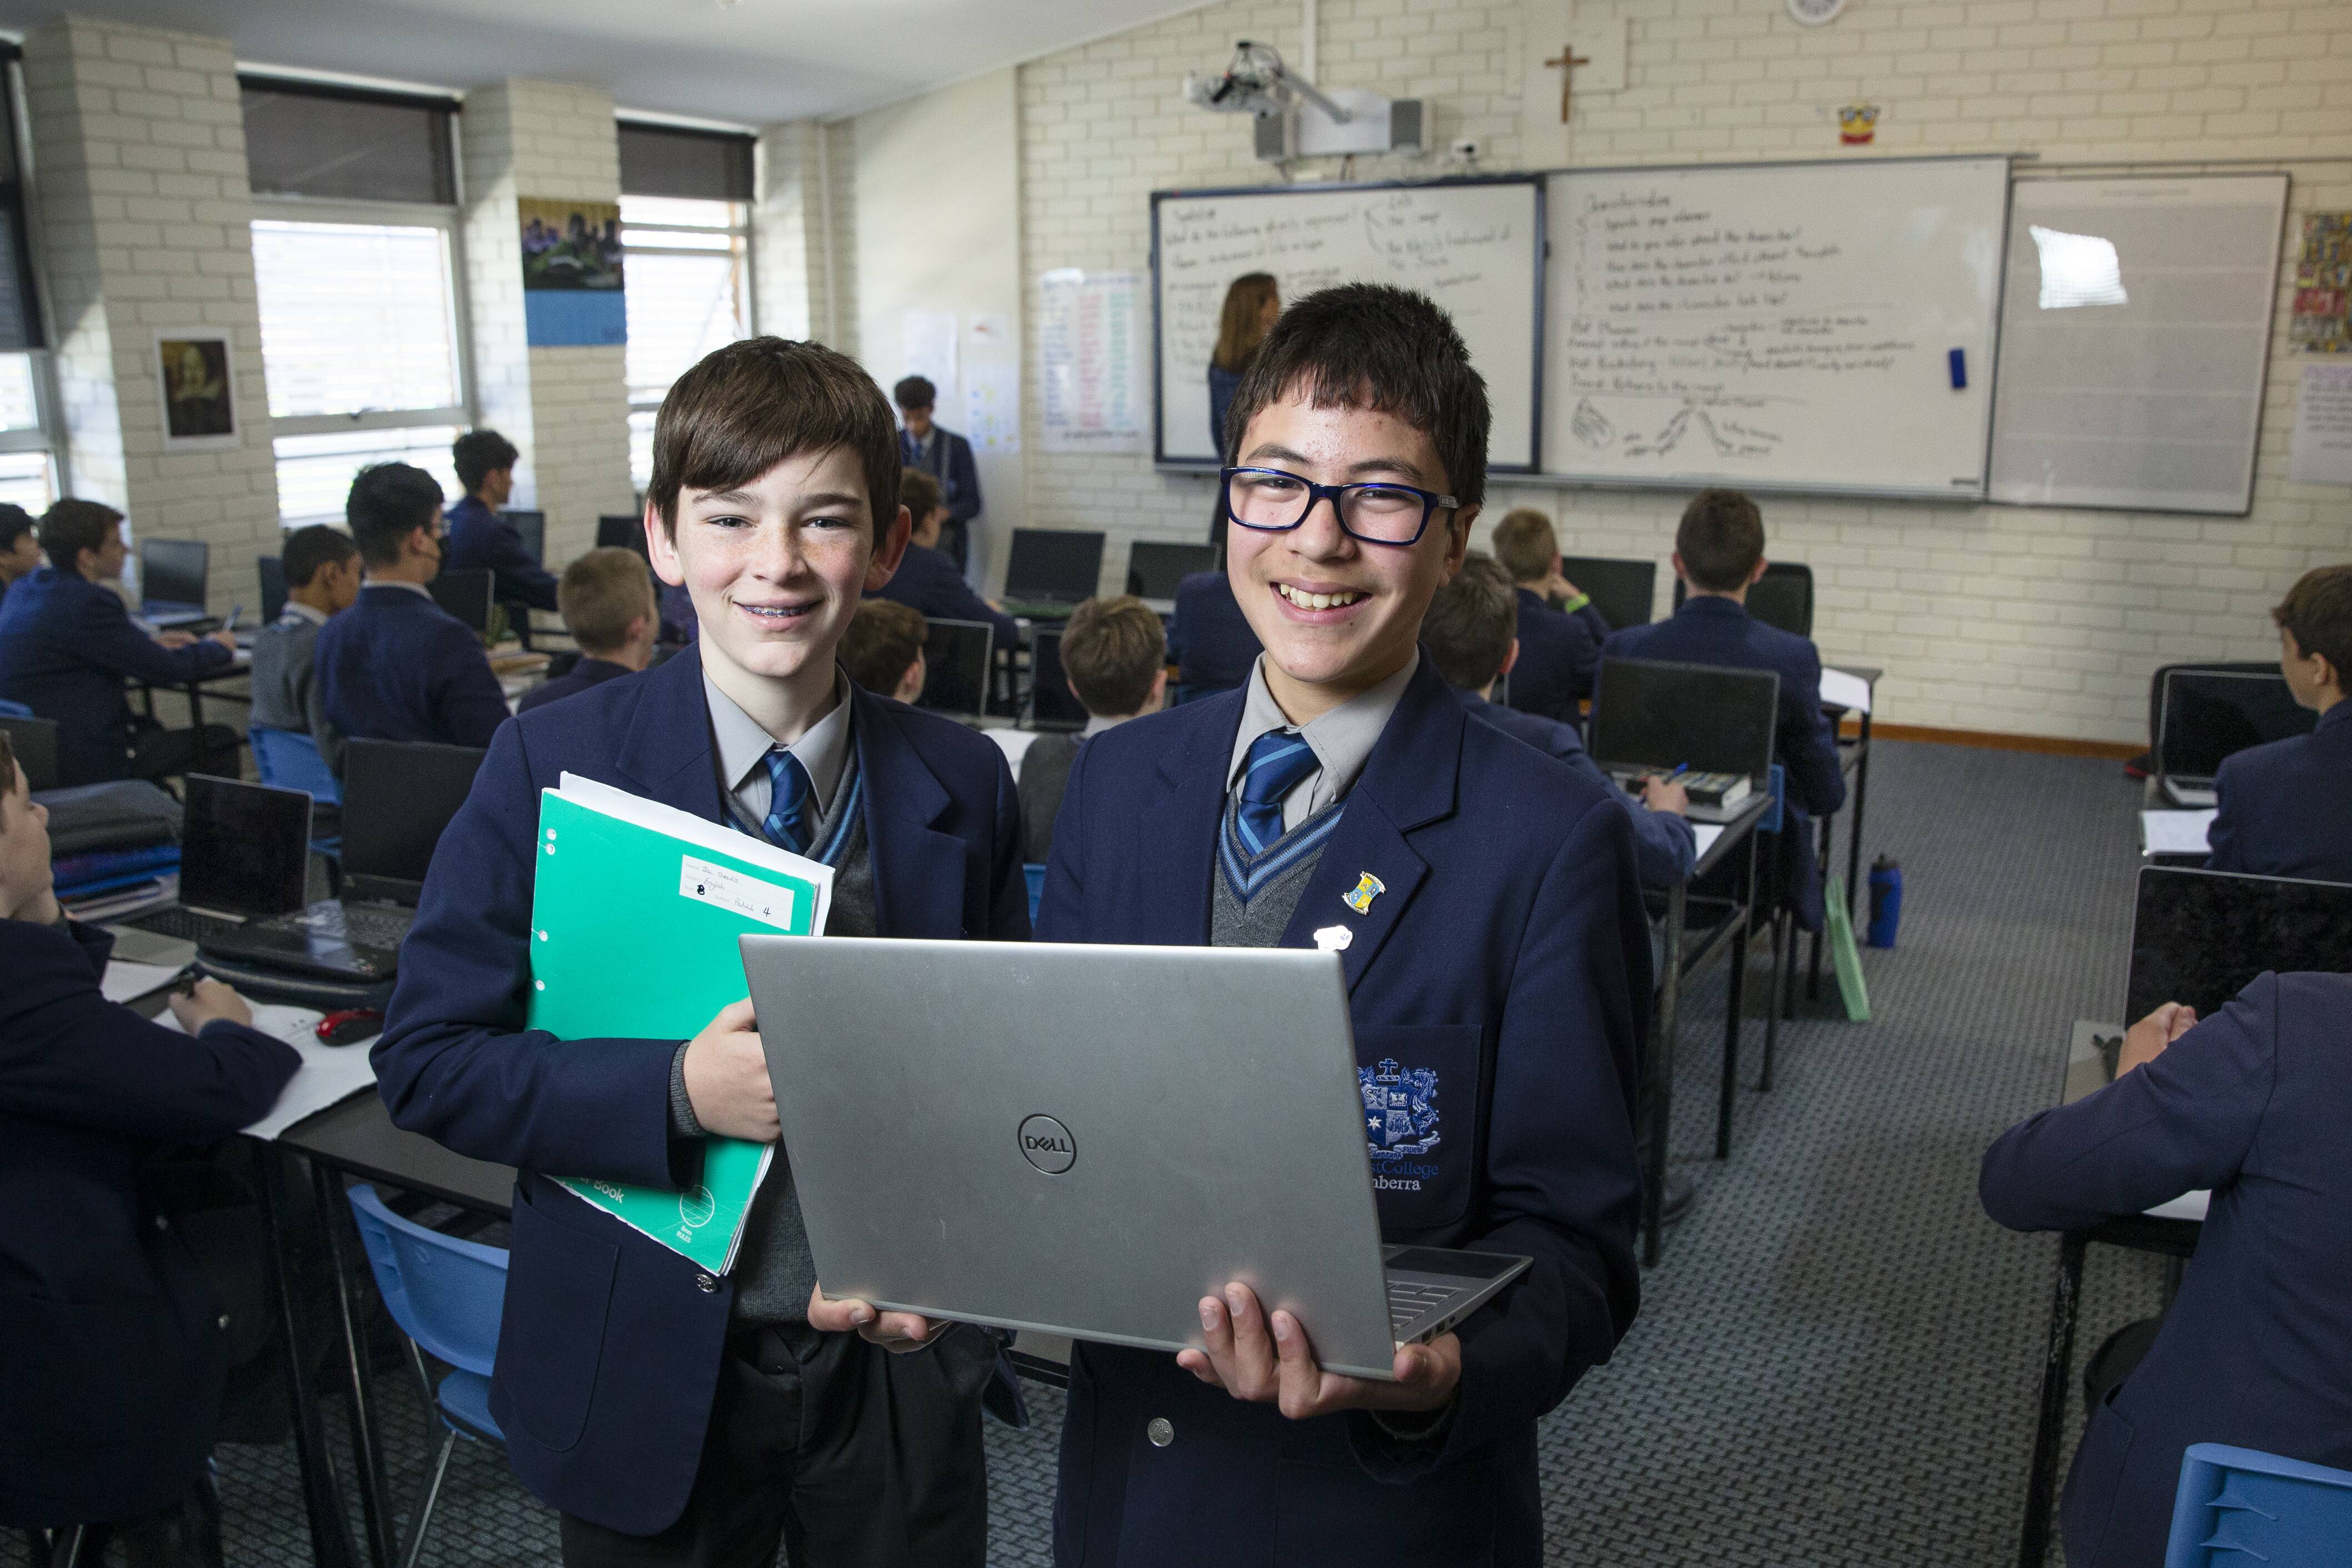 Wauchope High School locks pupils' mobile phones in pouches as a part of a  digital detox program, The Canberra Times